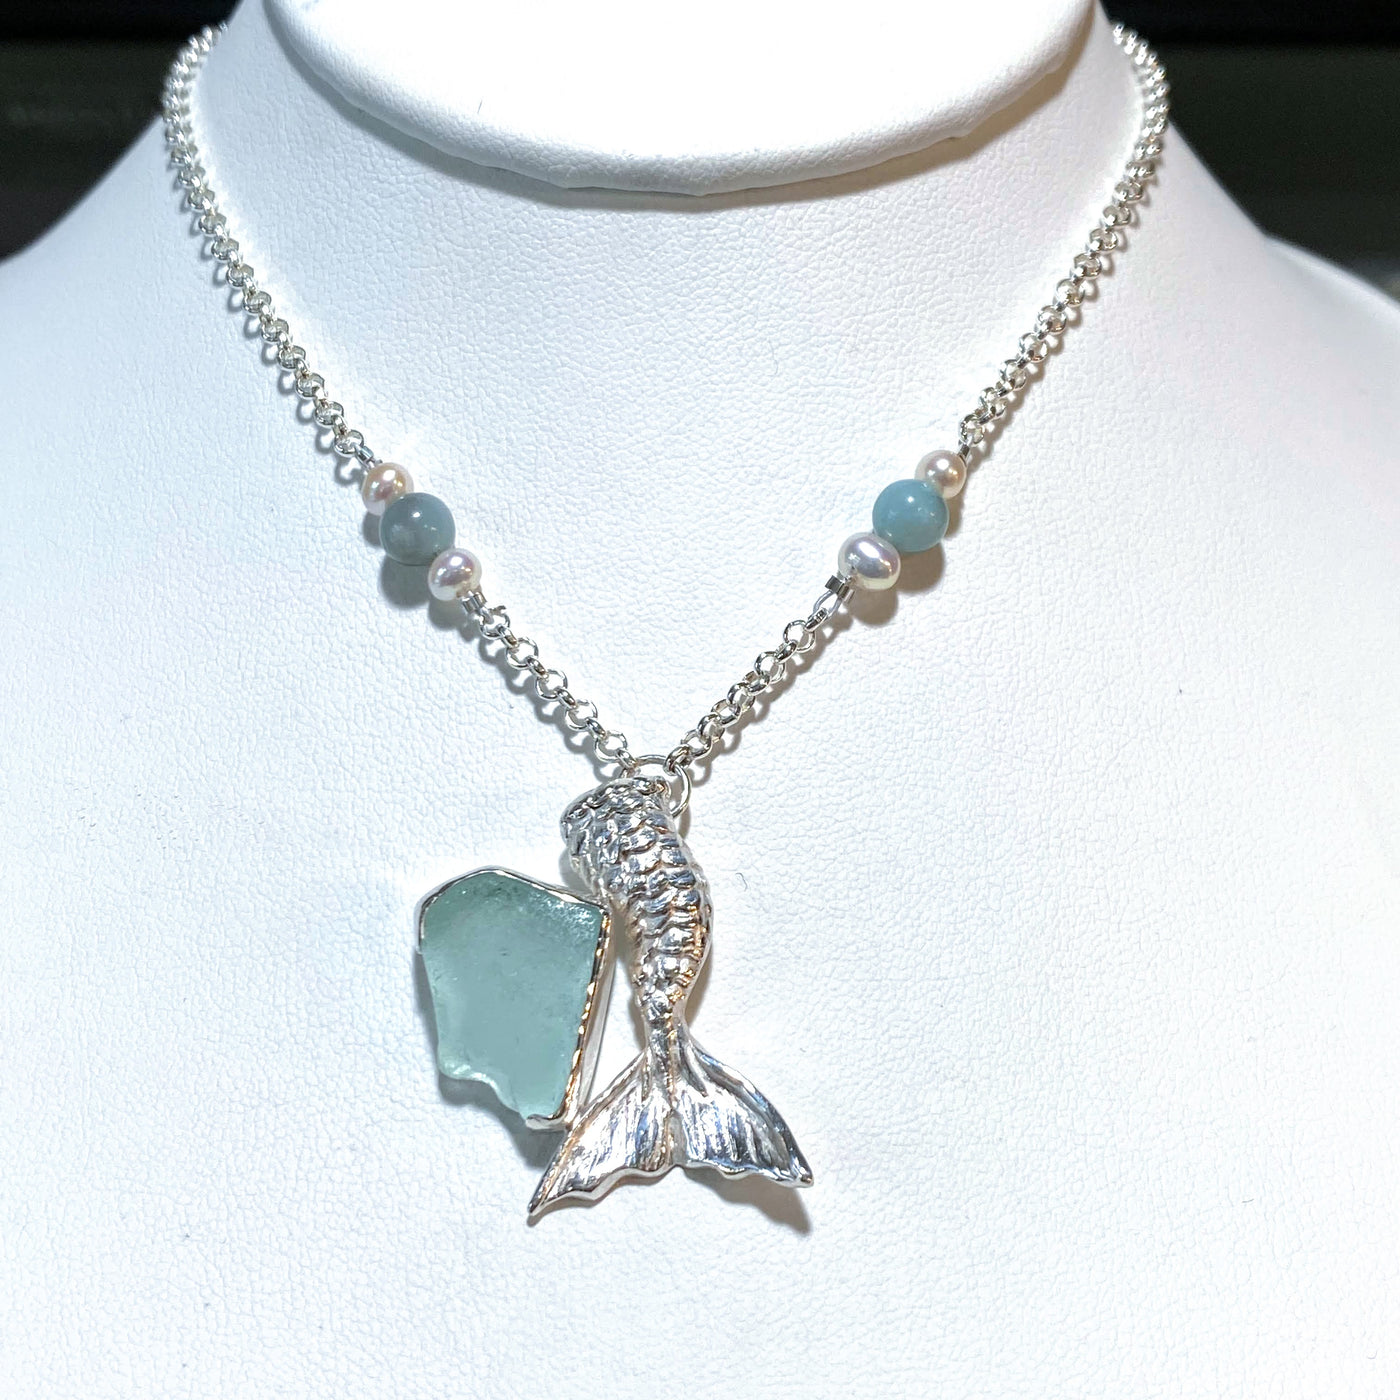 DS-112 Beach Glass Mermaid Necklace